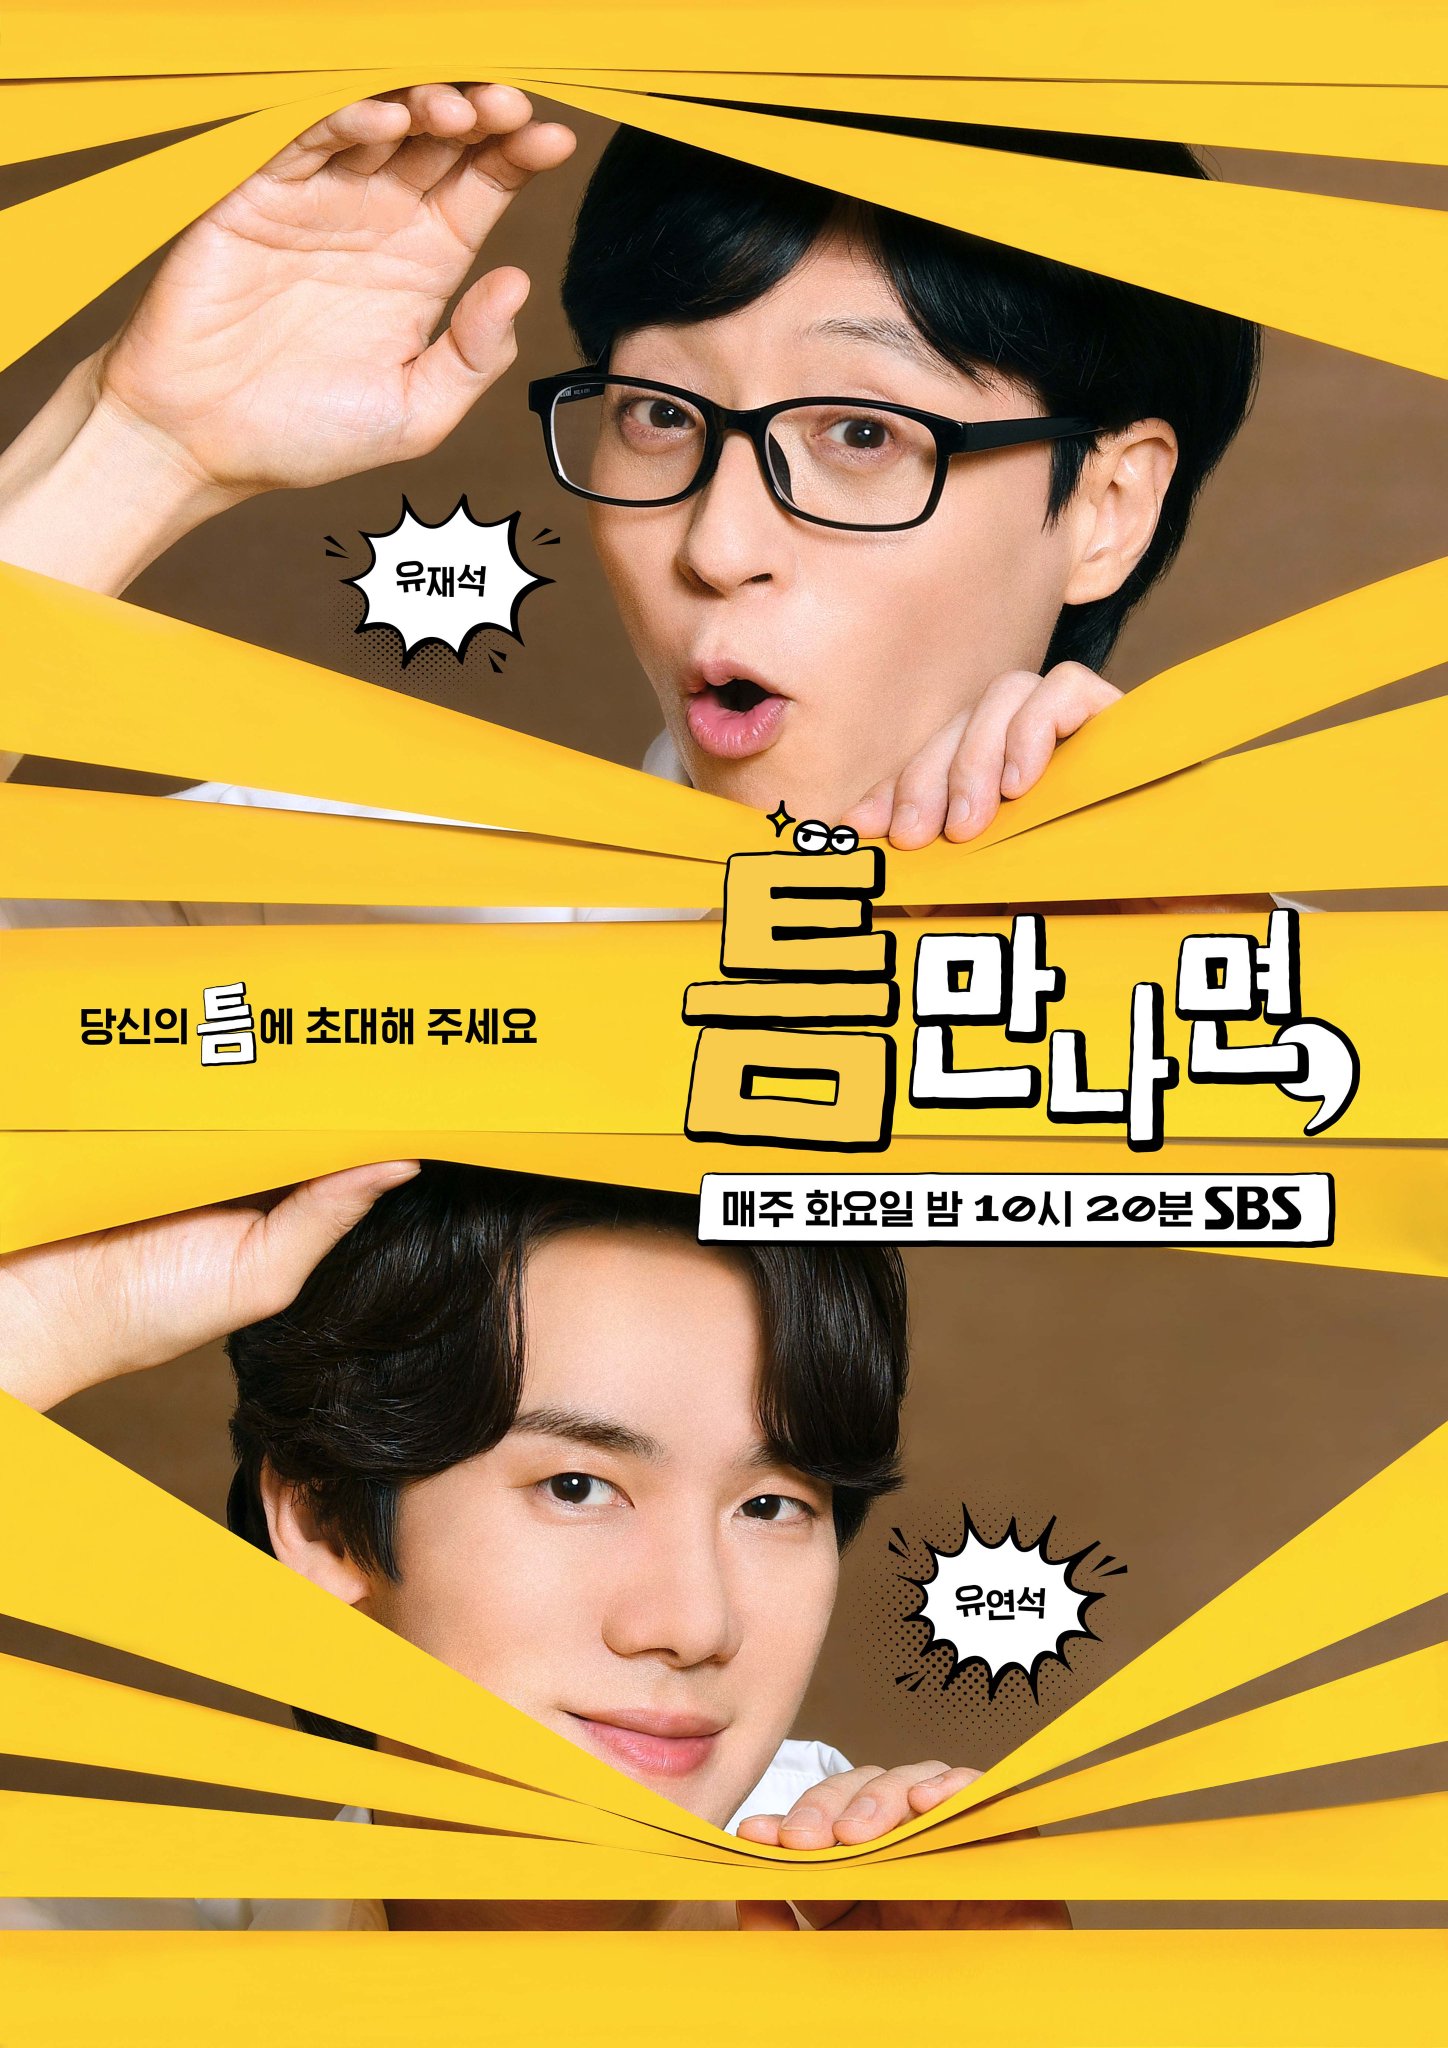 Yoo Jae Suk And Yoo Yeon Seok Ask Viewers To Invite Them Over In Posters For New Variety Show